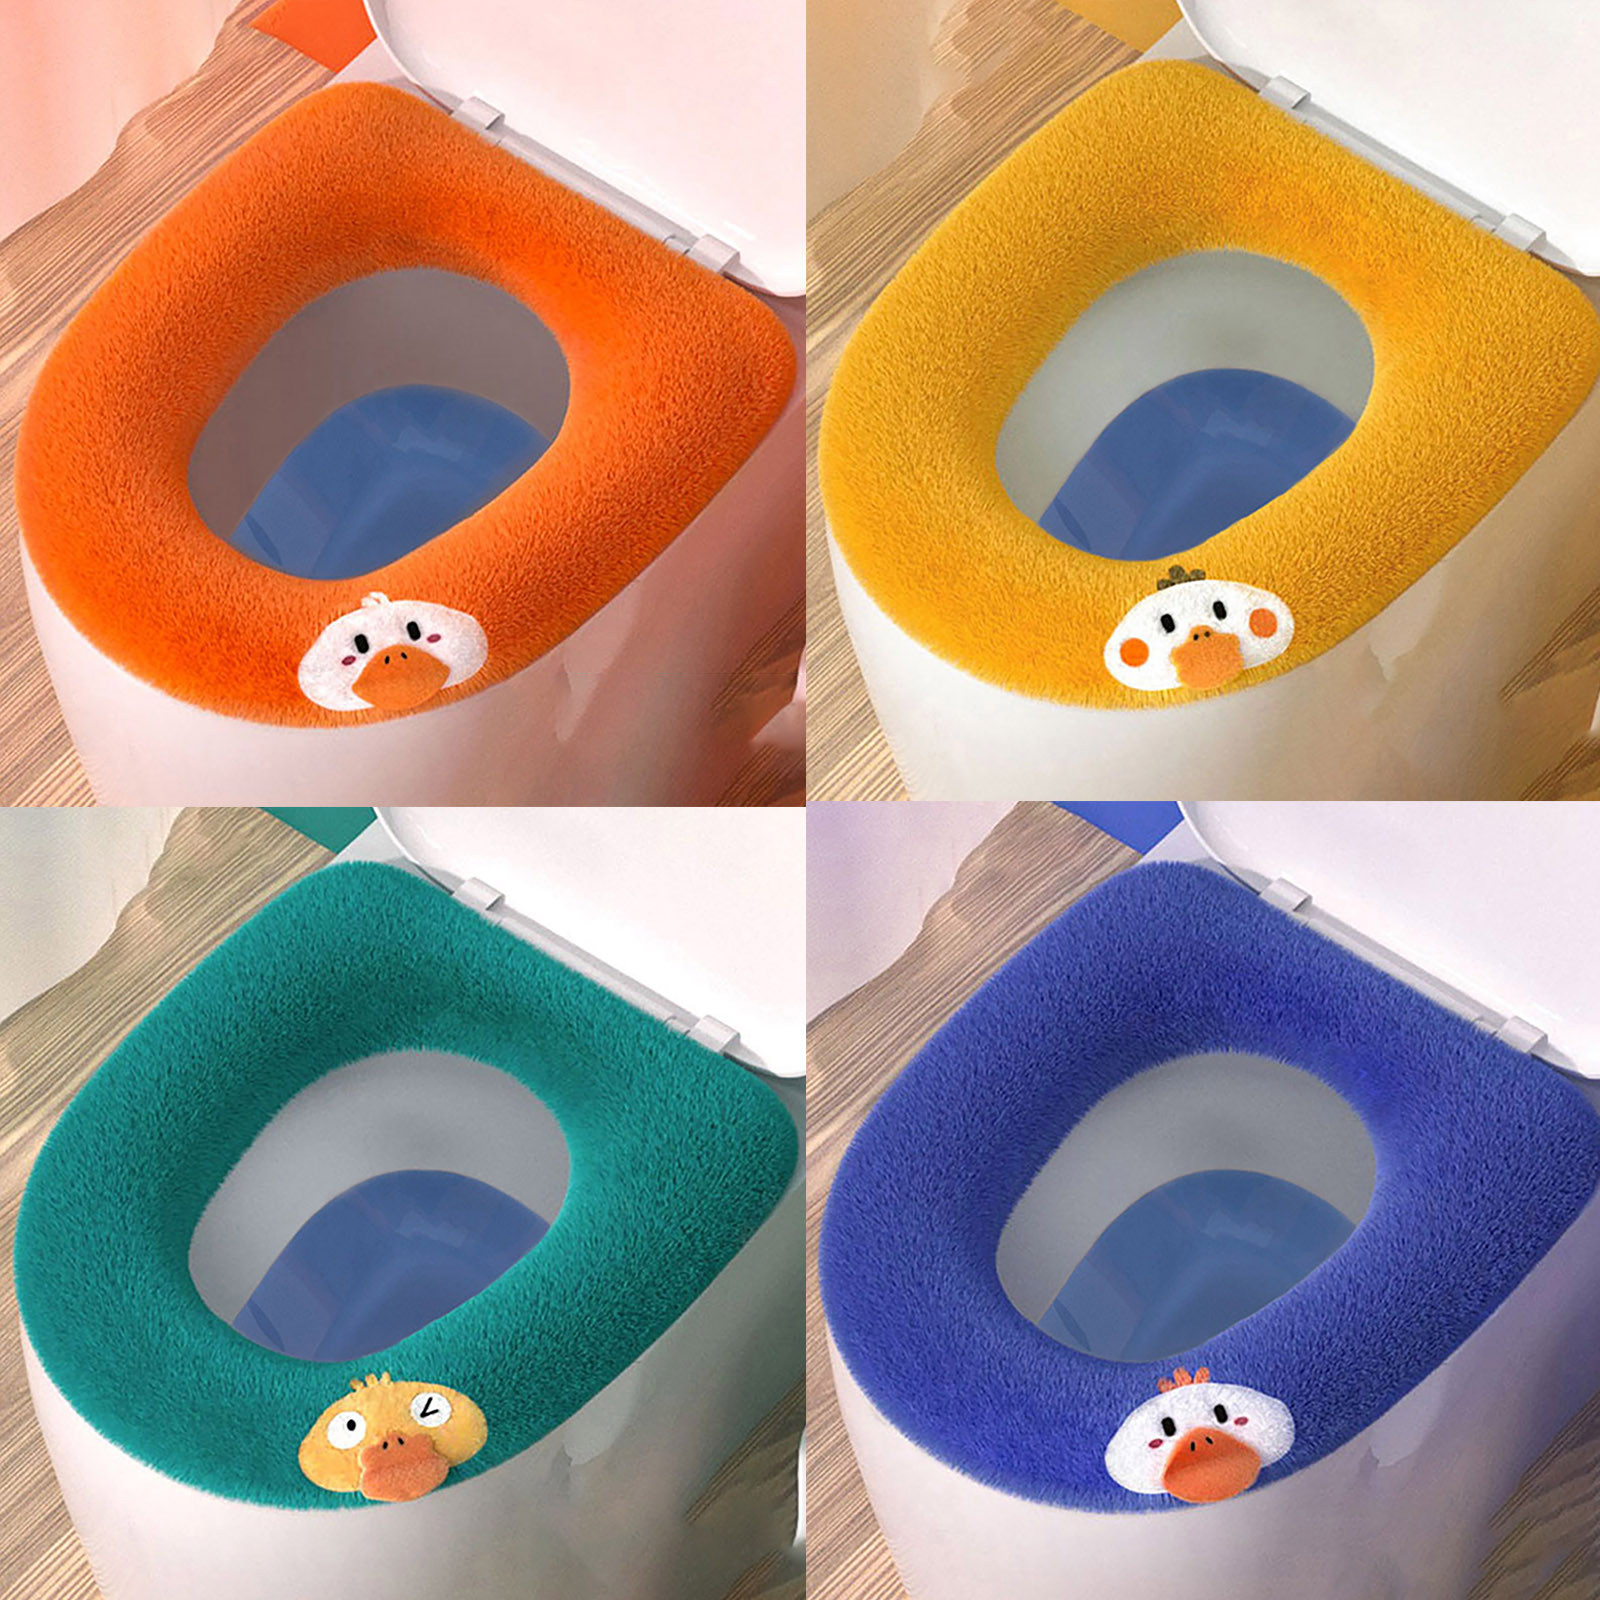 Soft Padded Toilet Seat Cover For Bathroomsstretchable Fibreseasy To Install Padded Bathroom Gel Mat Oversized Bath Mat